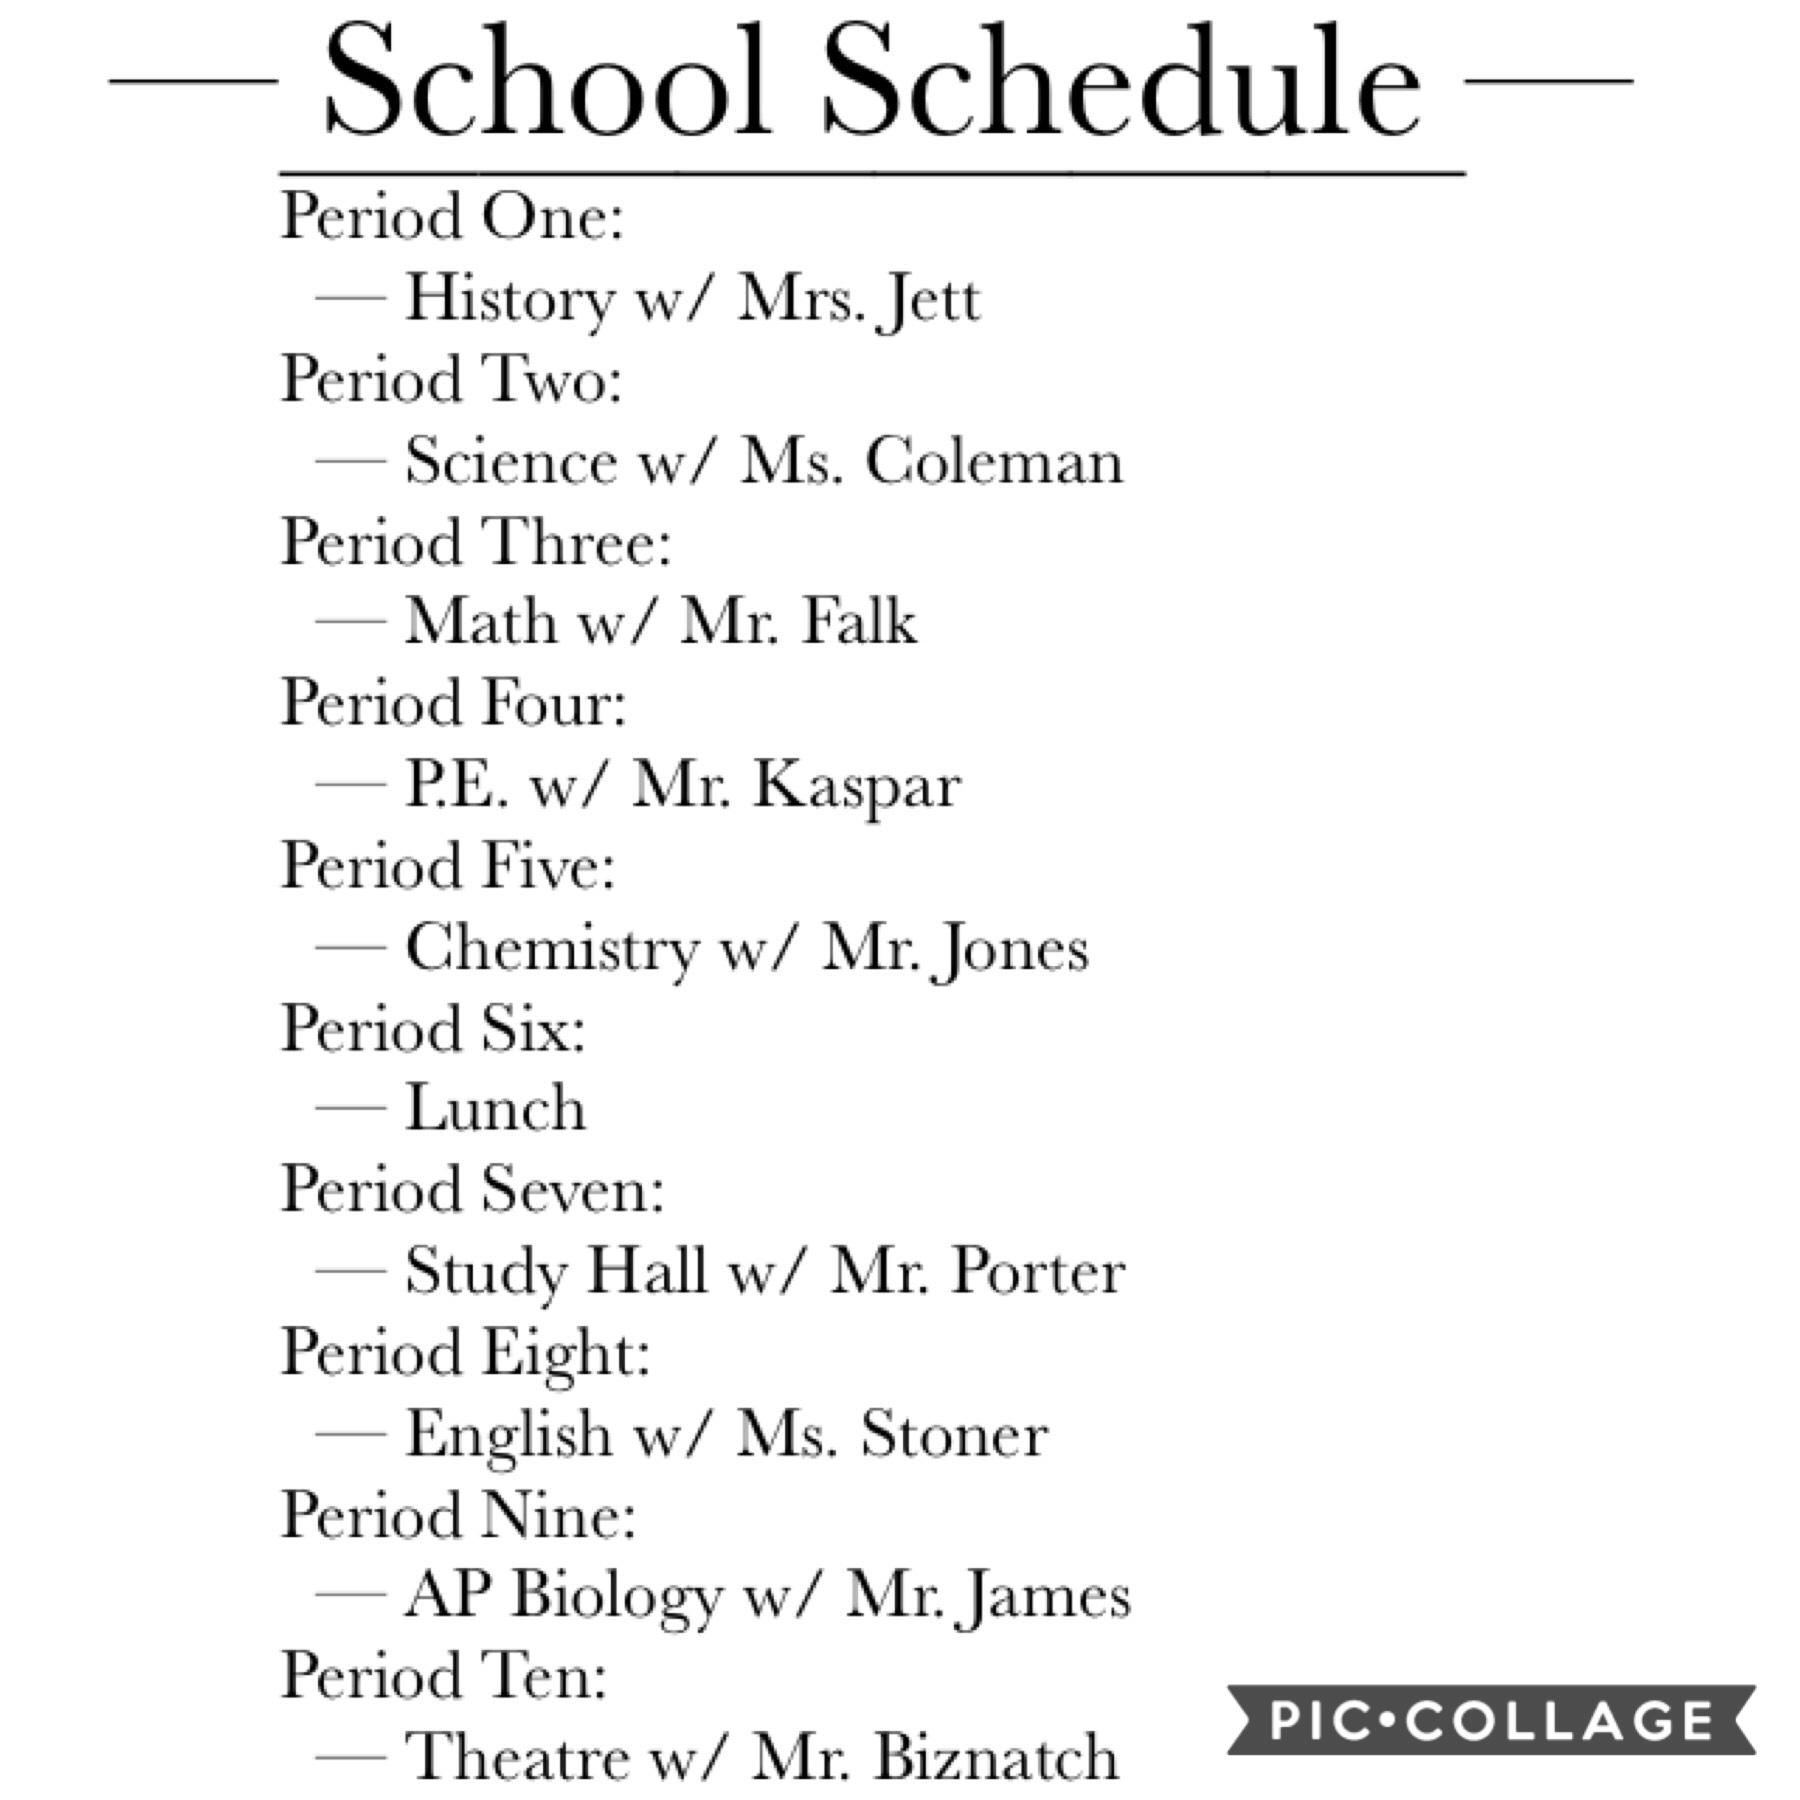 Here Is Your Official Schedule, if you don’t like it and it looks weird complain to the principal. I just tried giving each teacher a purpose and a period of time to shine. 

- REPOST -
(i hope this finally works like the clubs did)